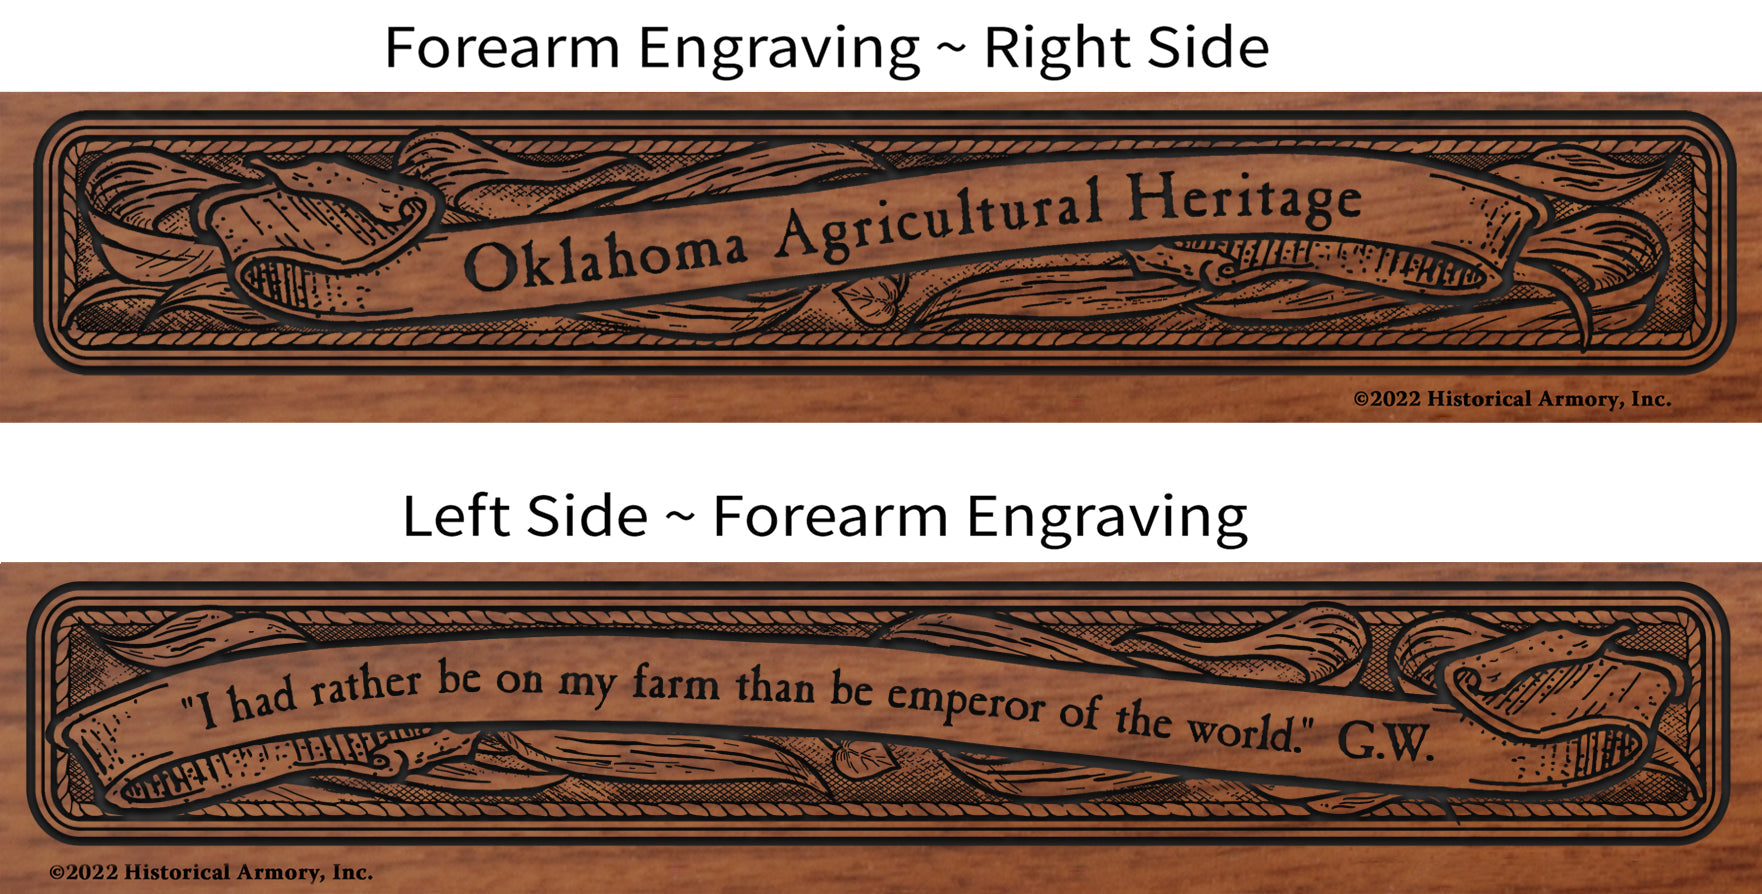 Oklahoma Agricultural Heritage Engraved Rifle Forearm